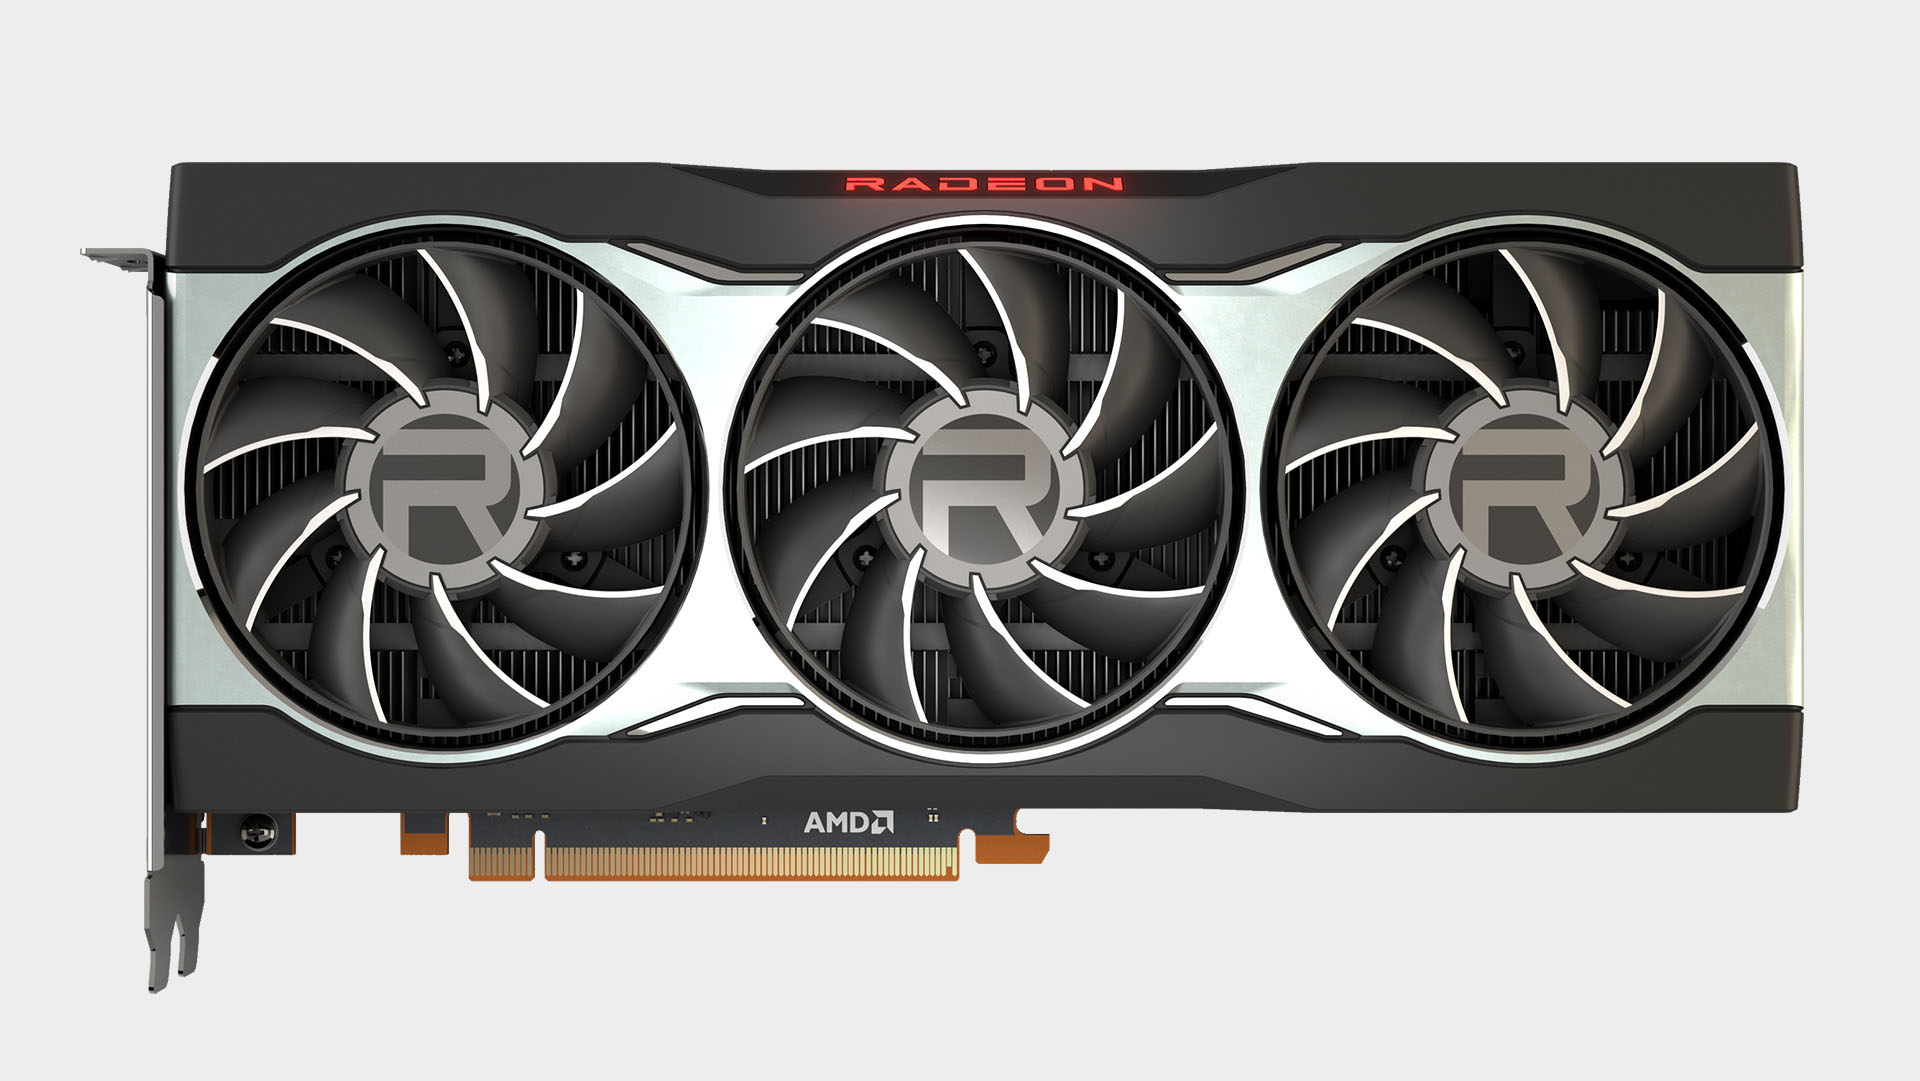 AMD Radeon RX 6800 graphics card shot from above, fan view, on a blank background